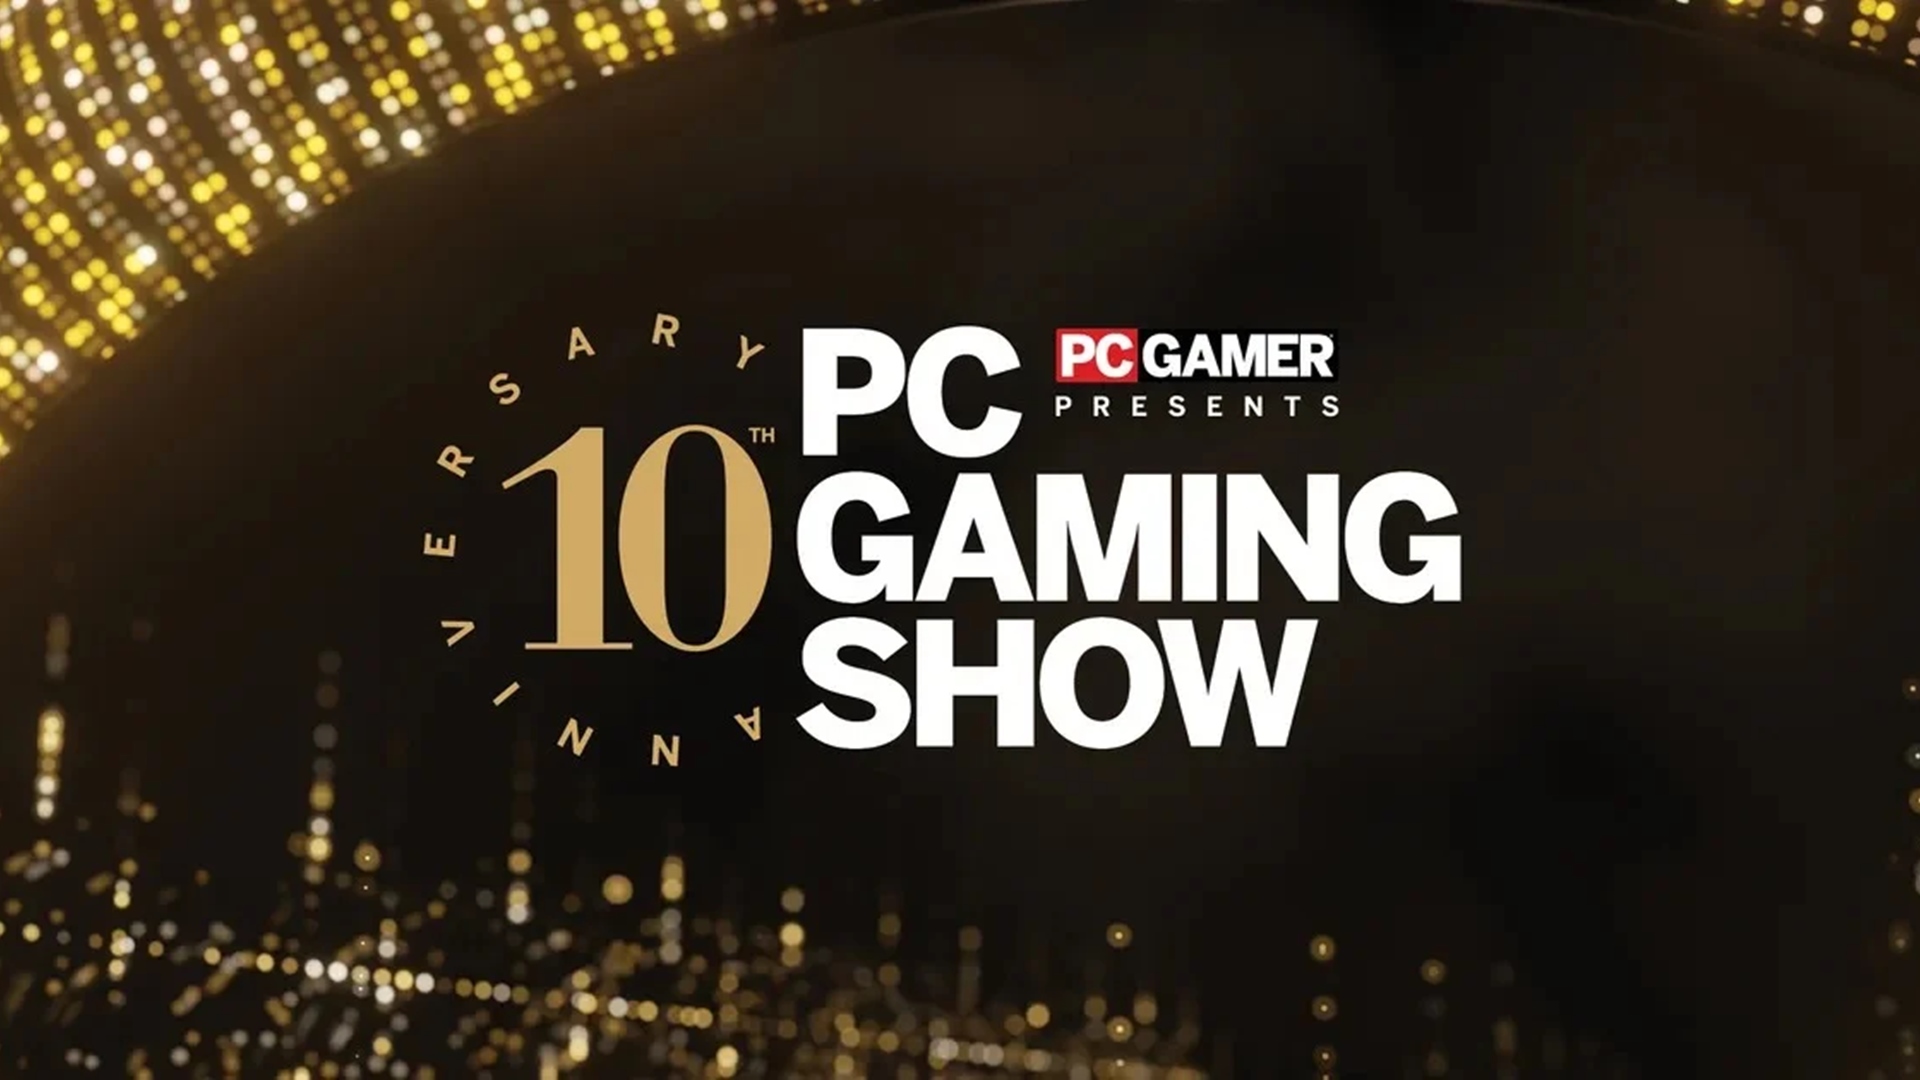 PC Gaming Show.